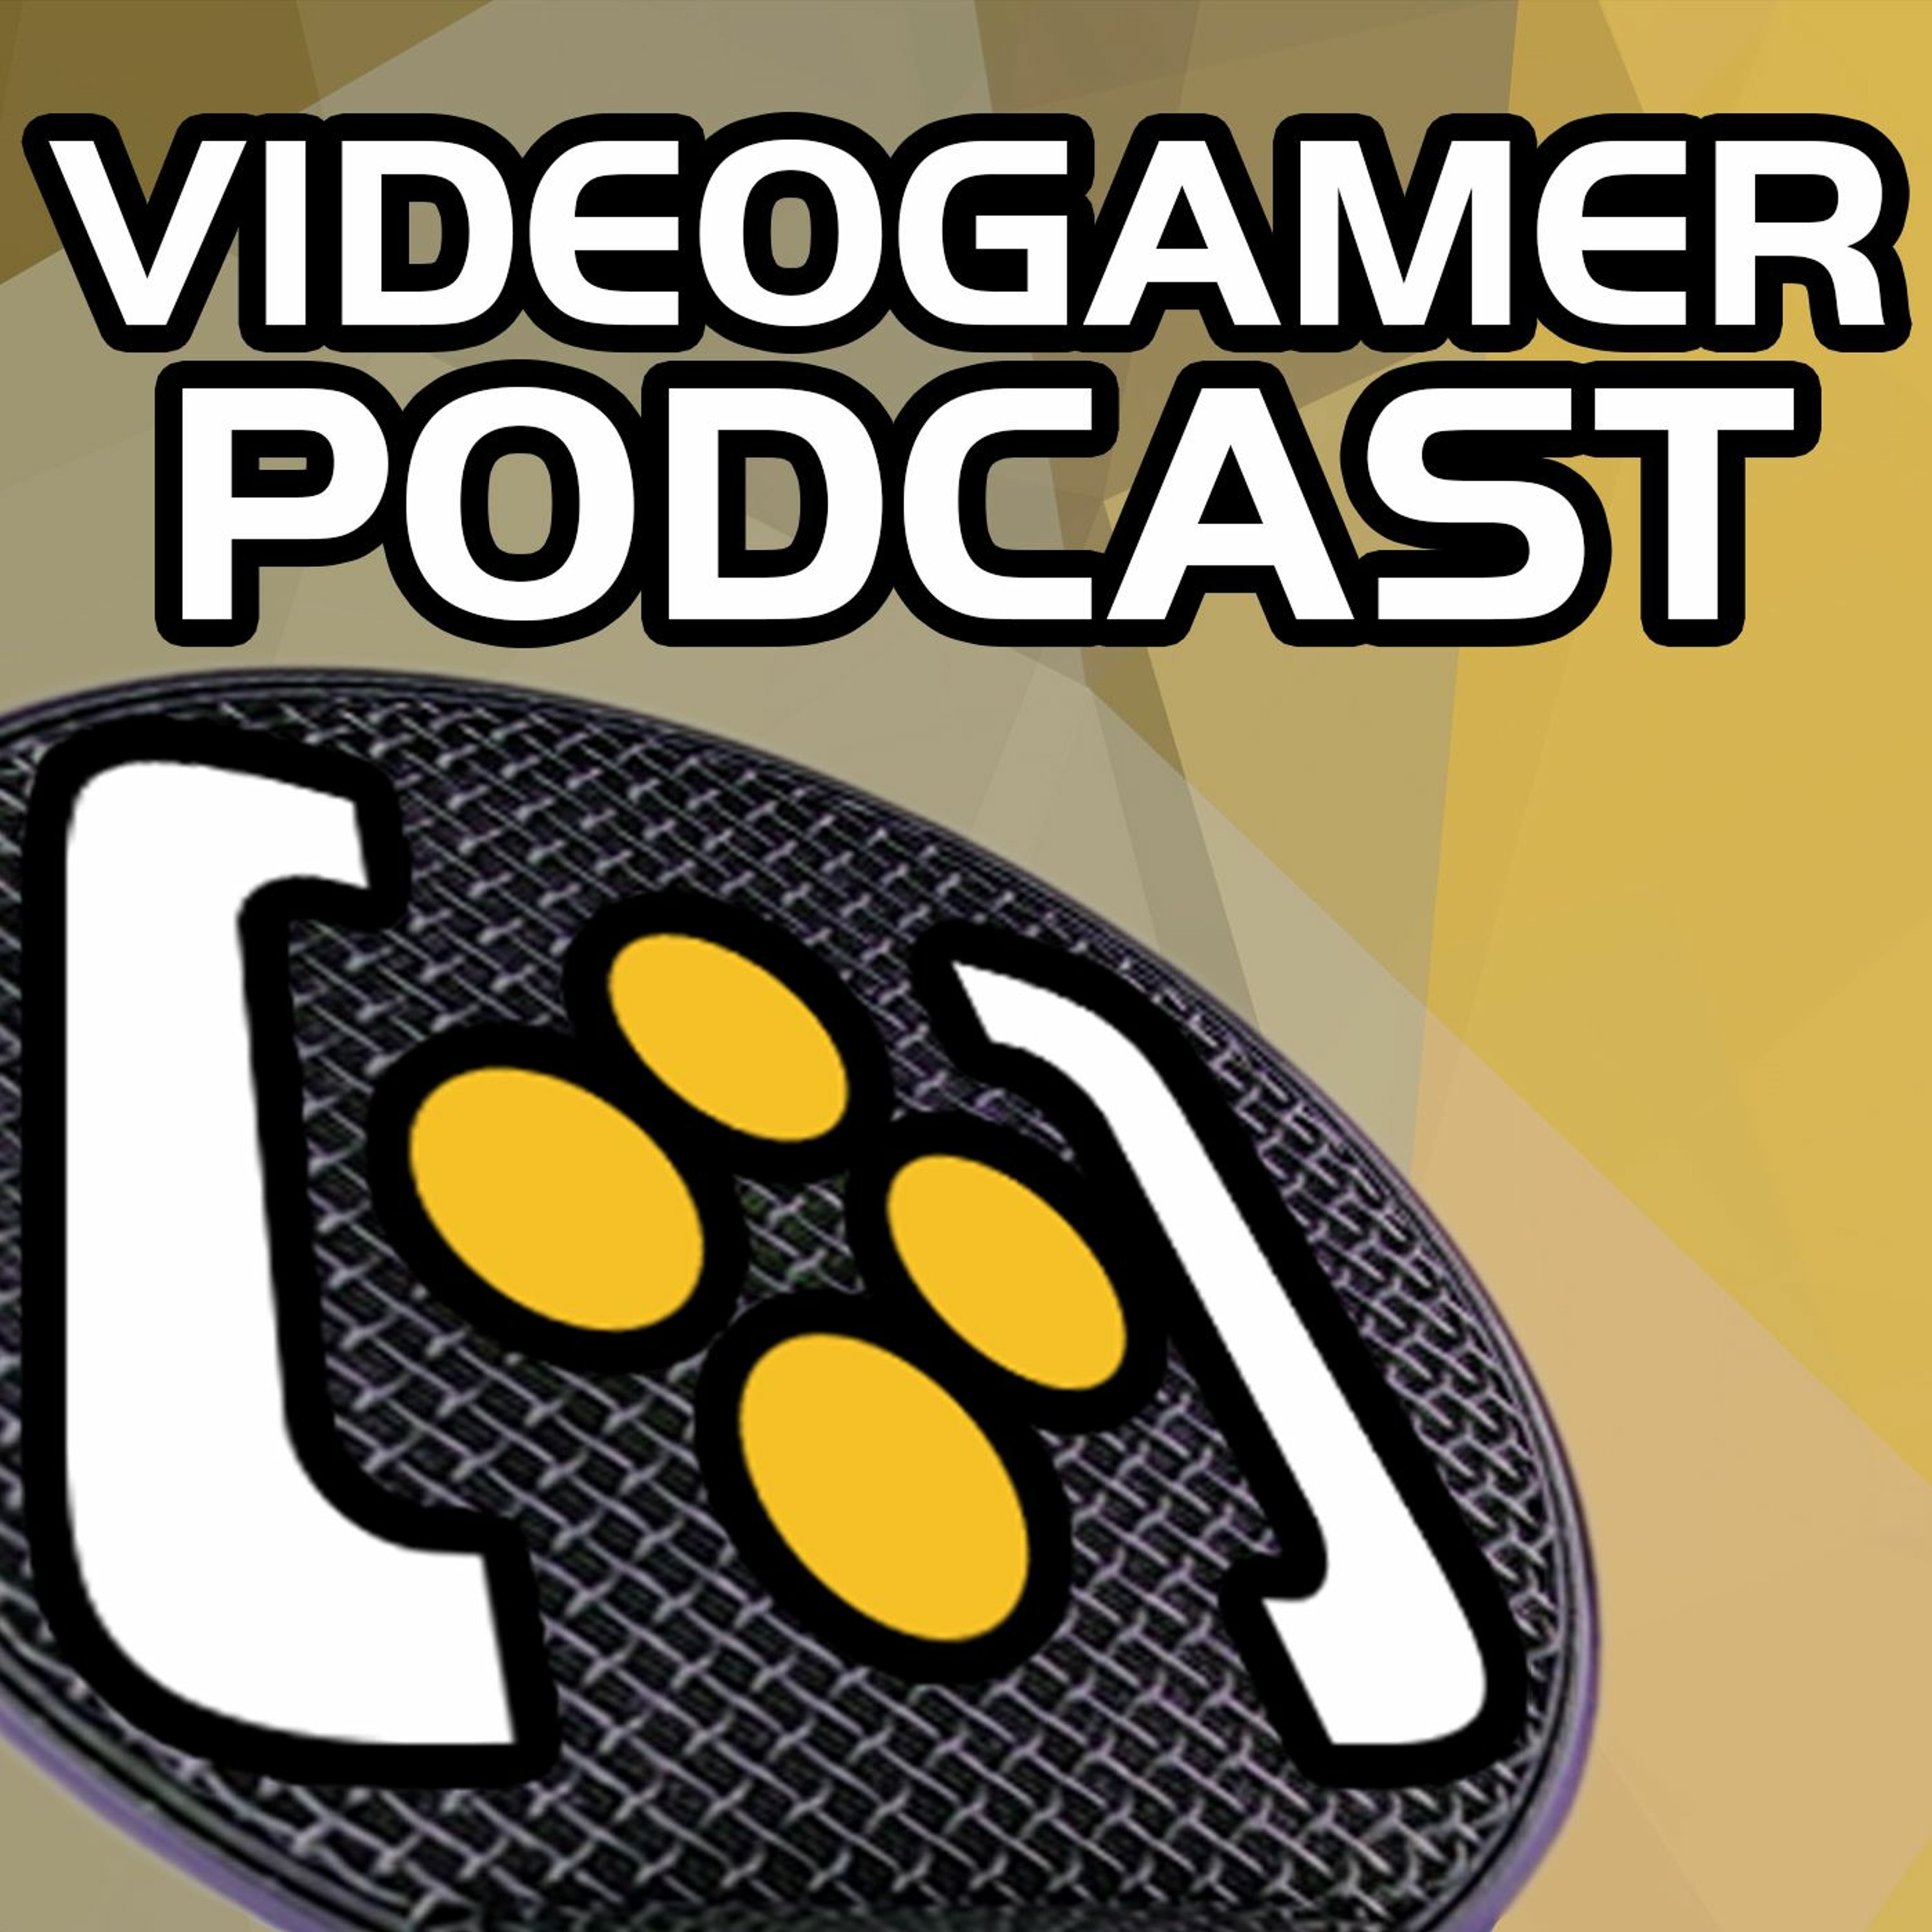 VideoGamer Podcast #490: Protocols and Prices